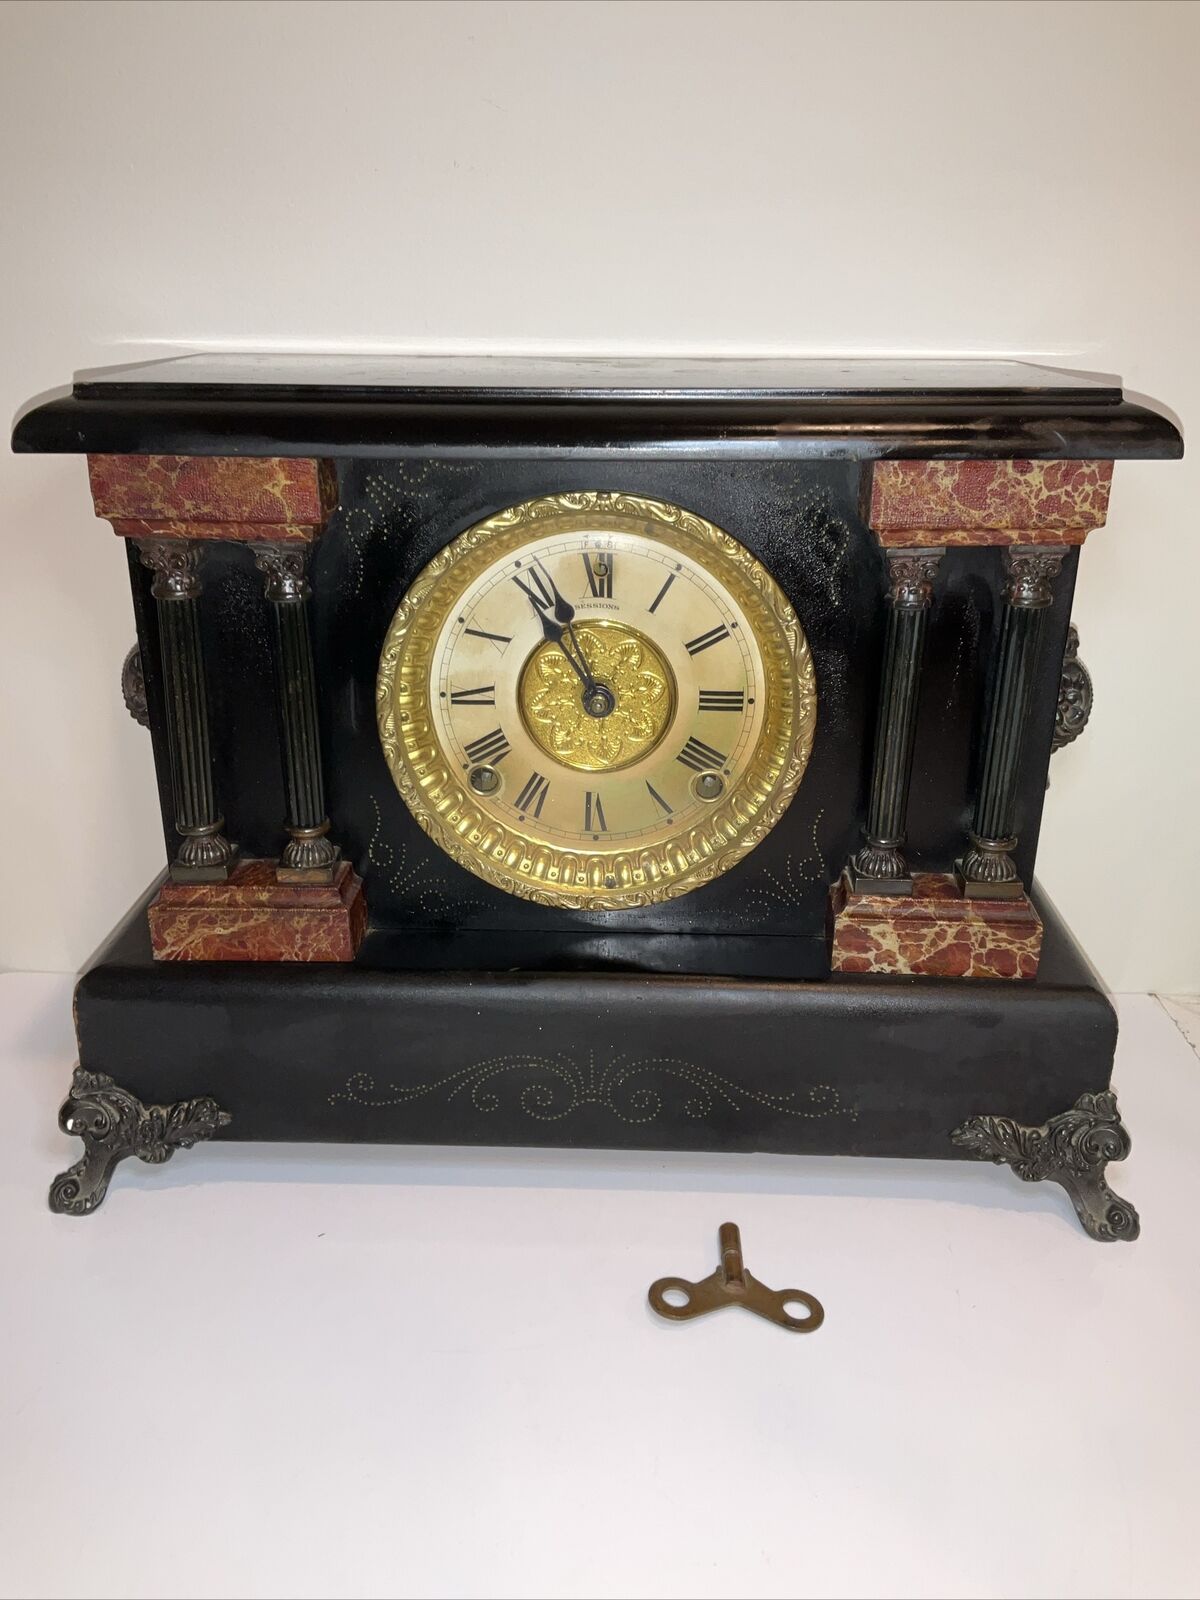 Antique 1904 Sessions Skeleton 4 Pillar Mantle Clock Working Great 15”x11”x6”